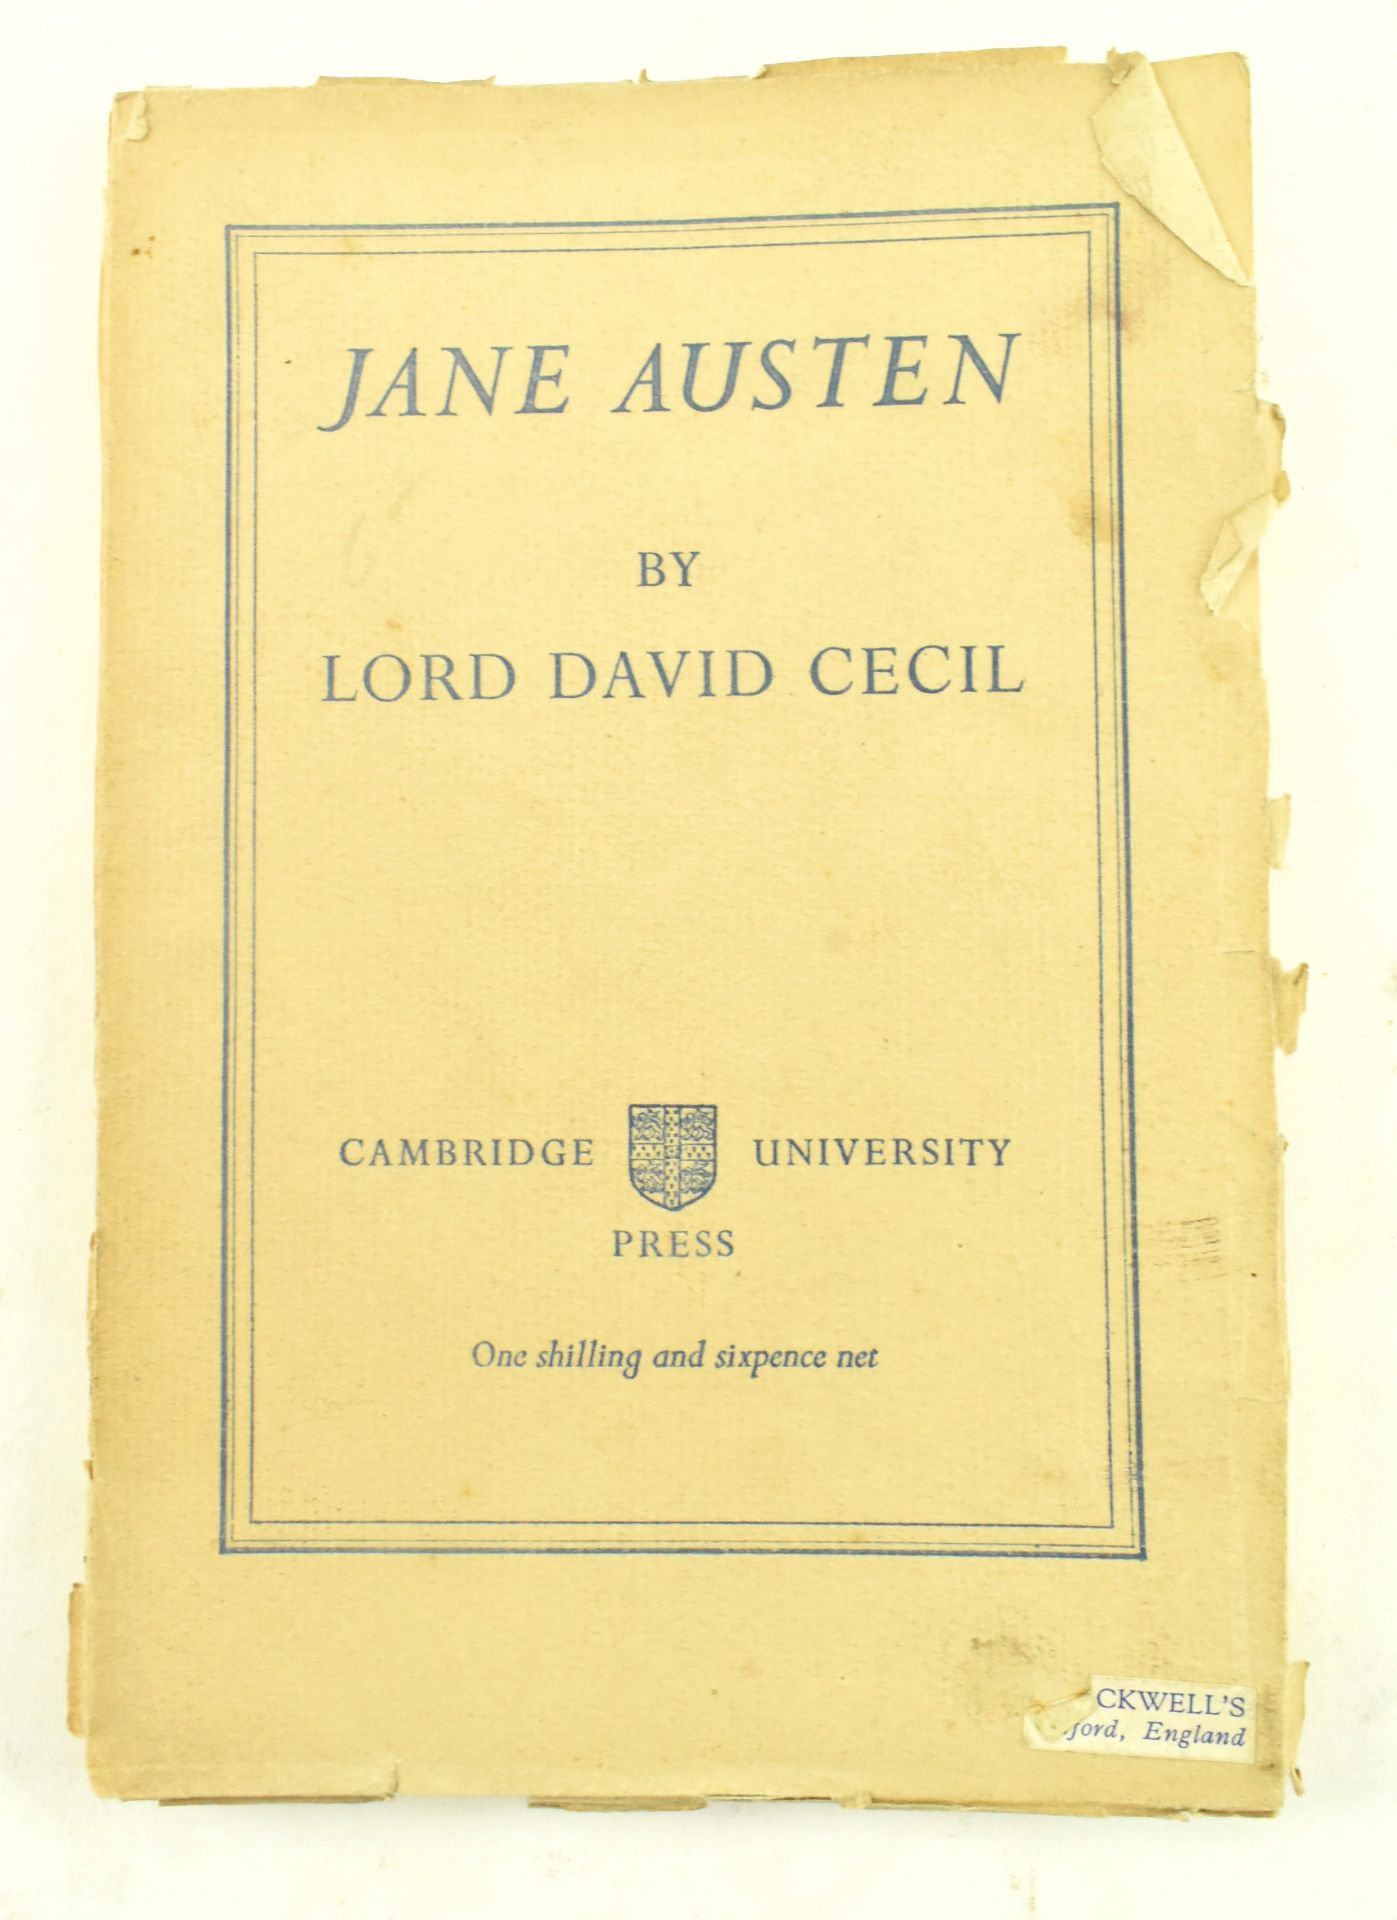 JANE AUSTEN. FOUR 20TH CENTURY PREVIOUSLY UNPUBLISHED WORKS - Image 7 of 9